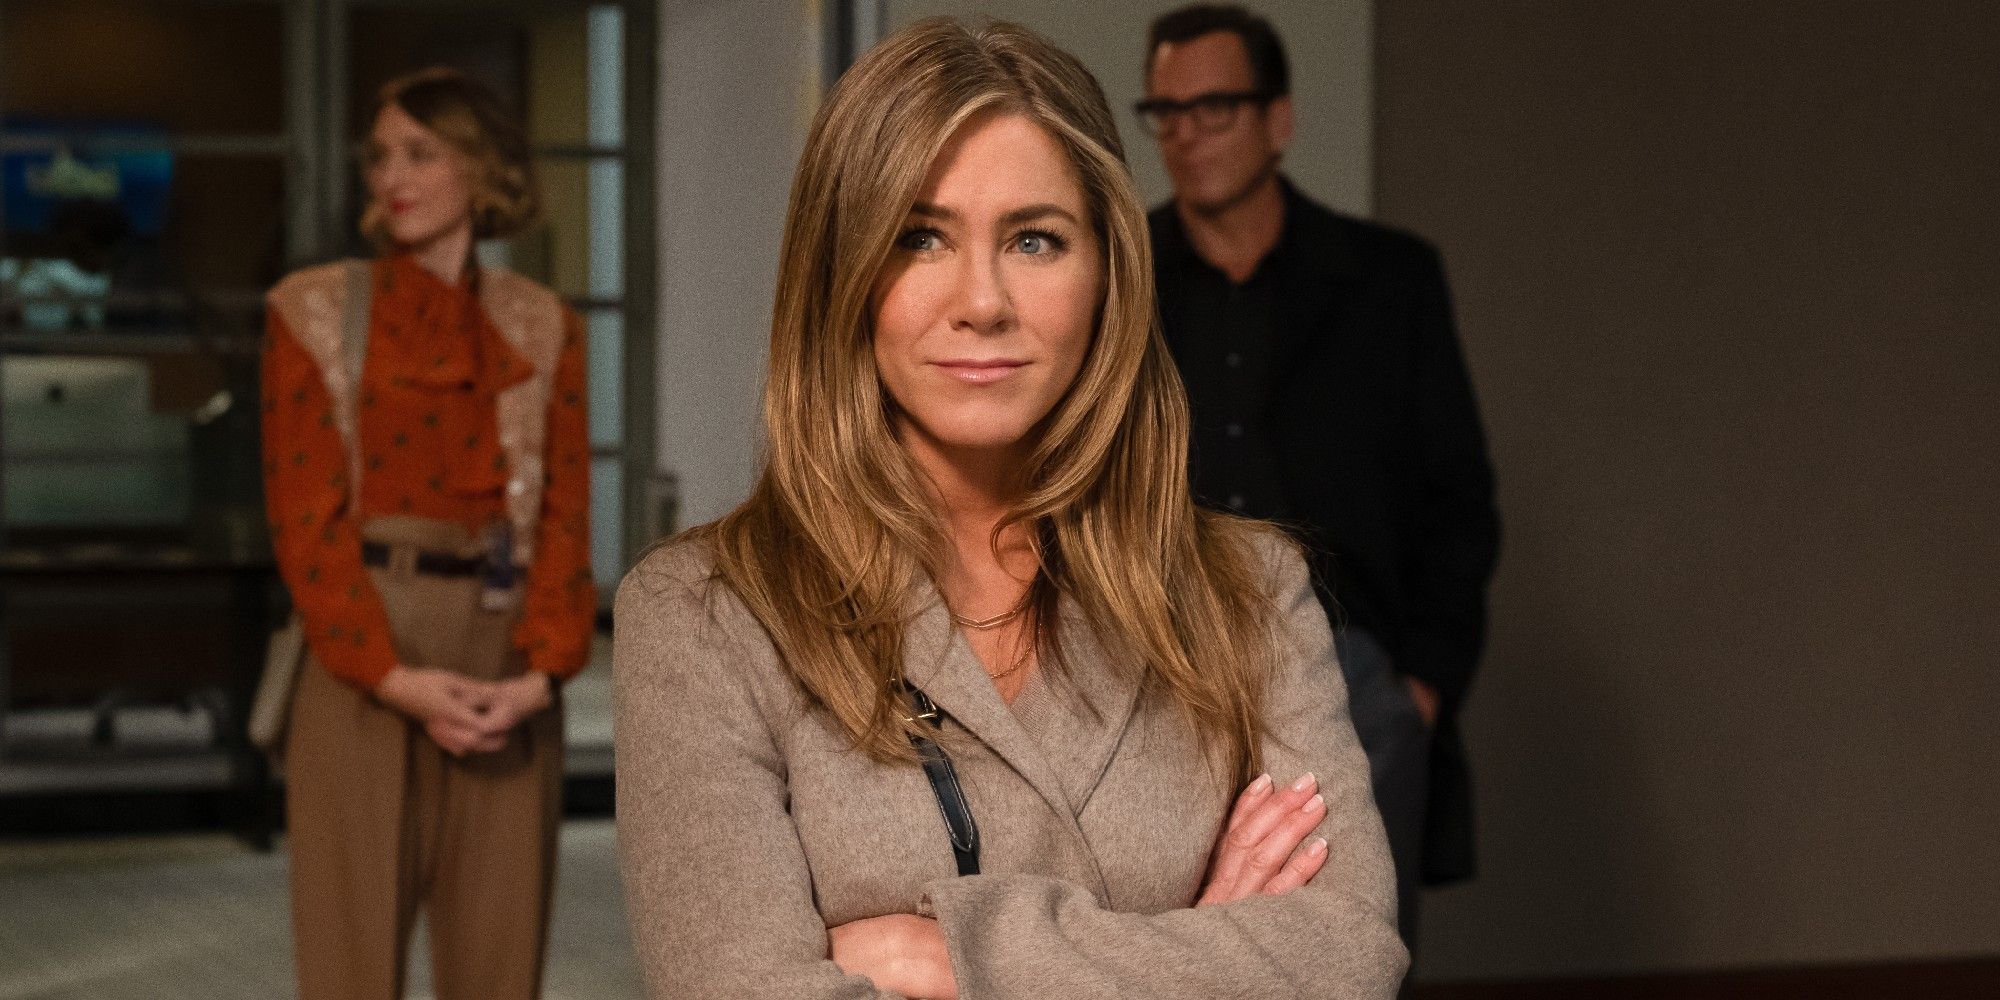 jennifer aniston as alex levy in the morning show season 2